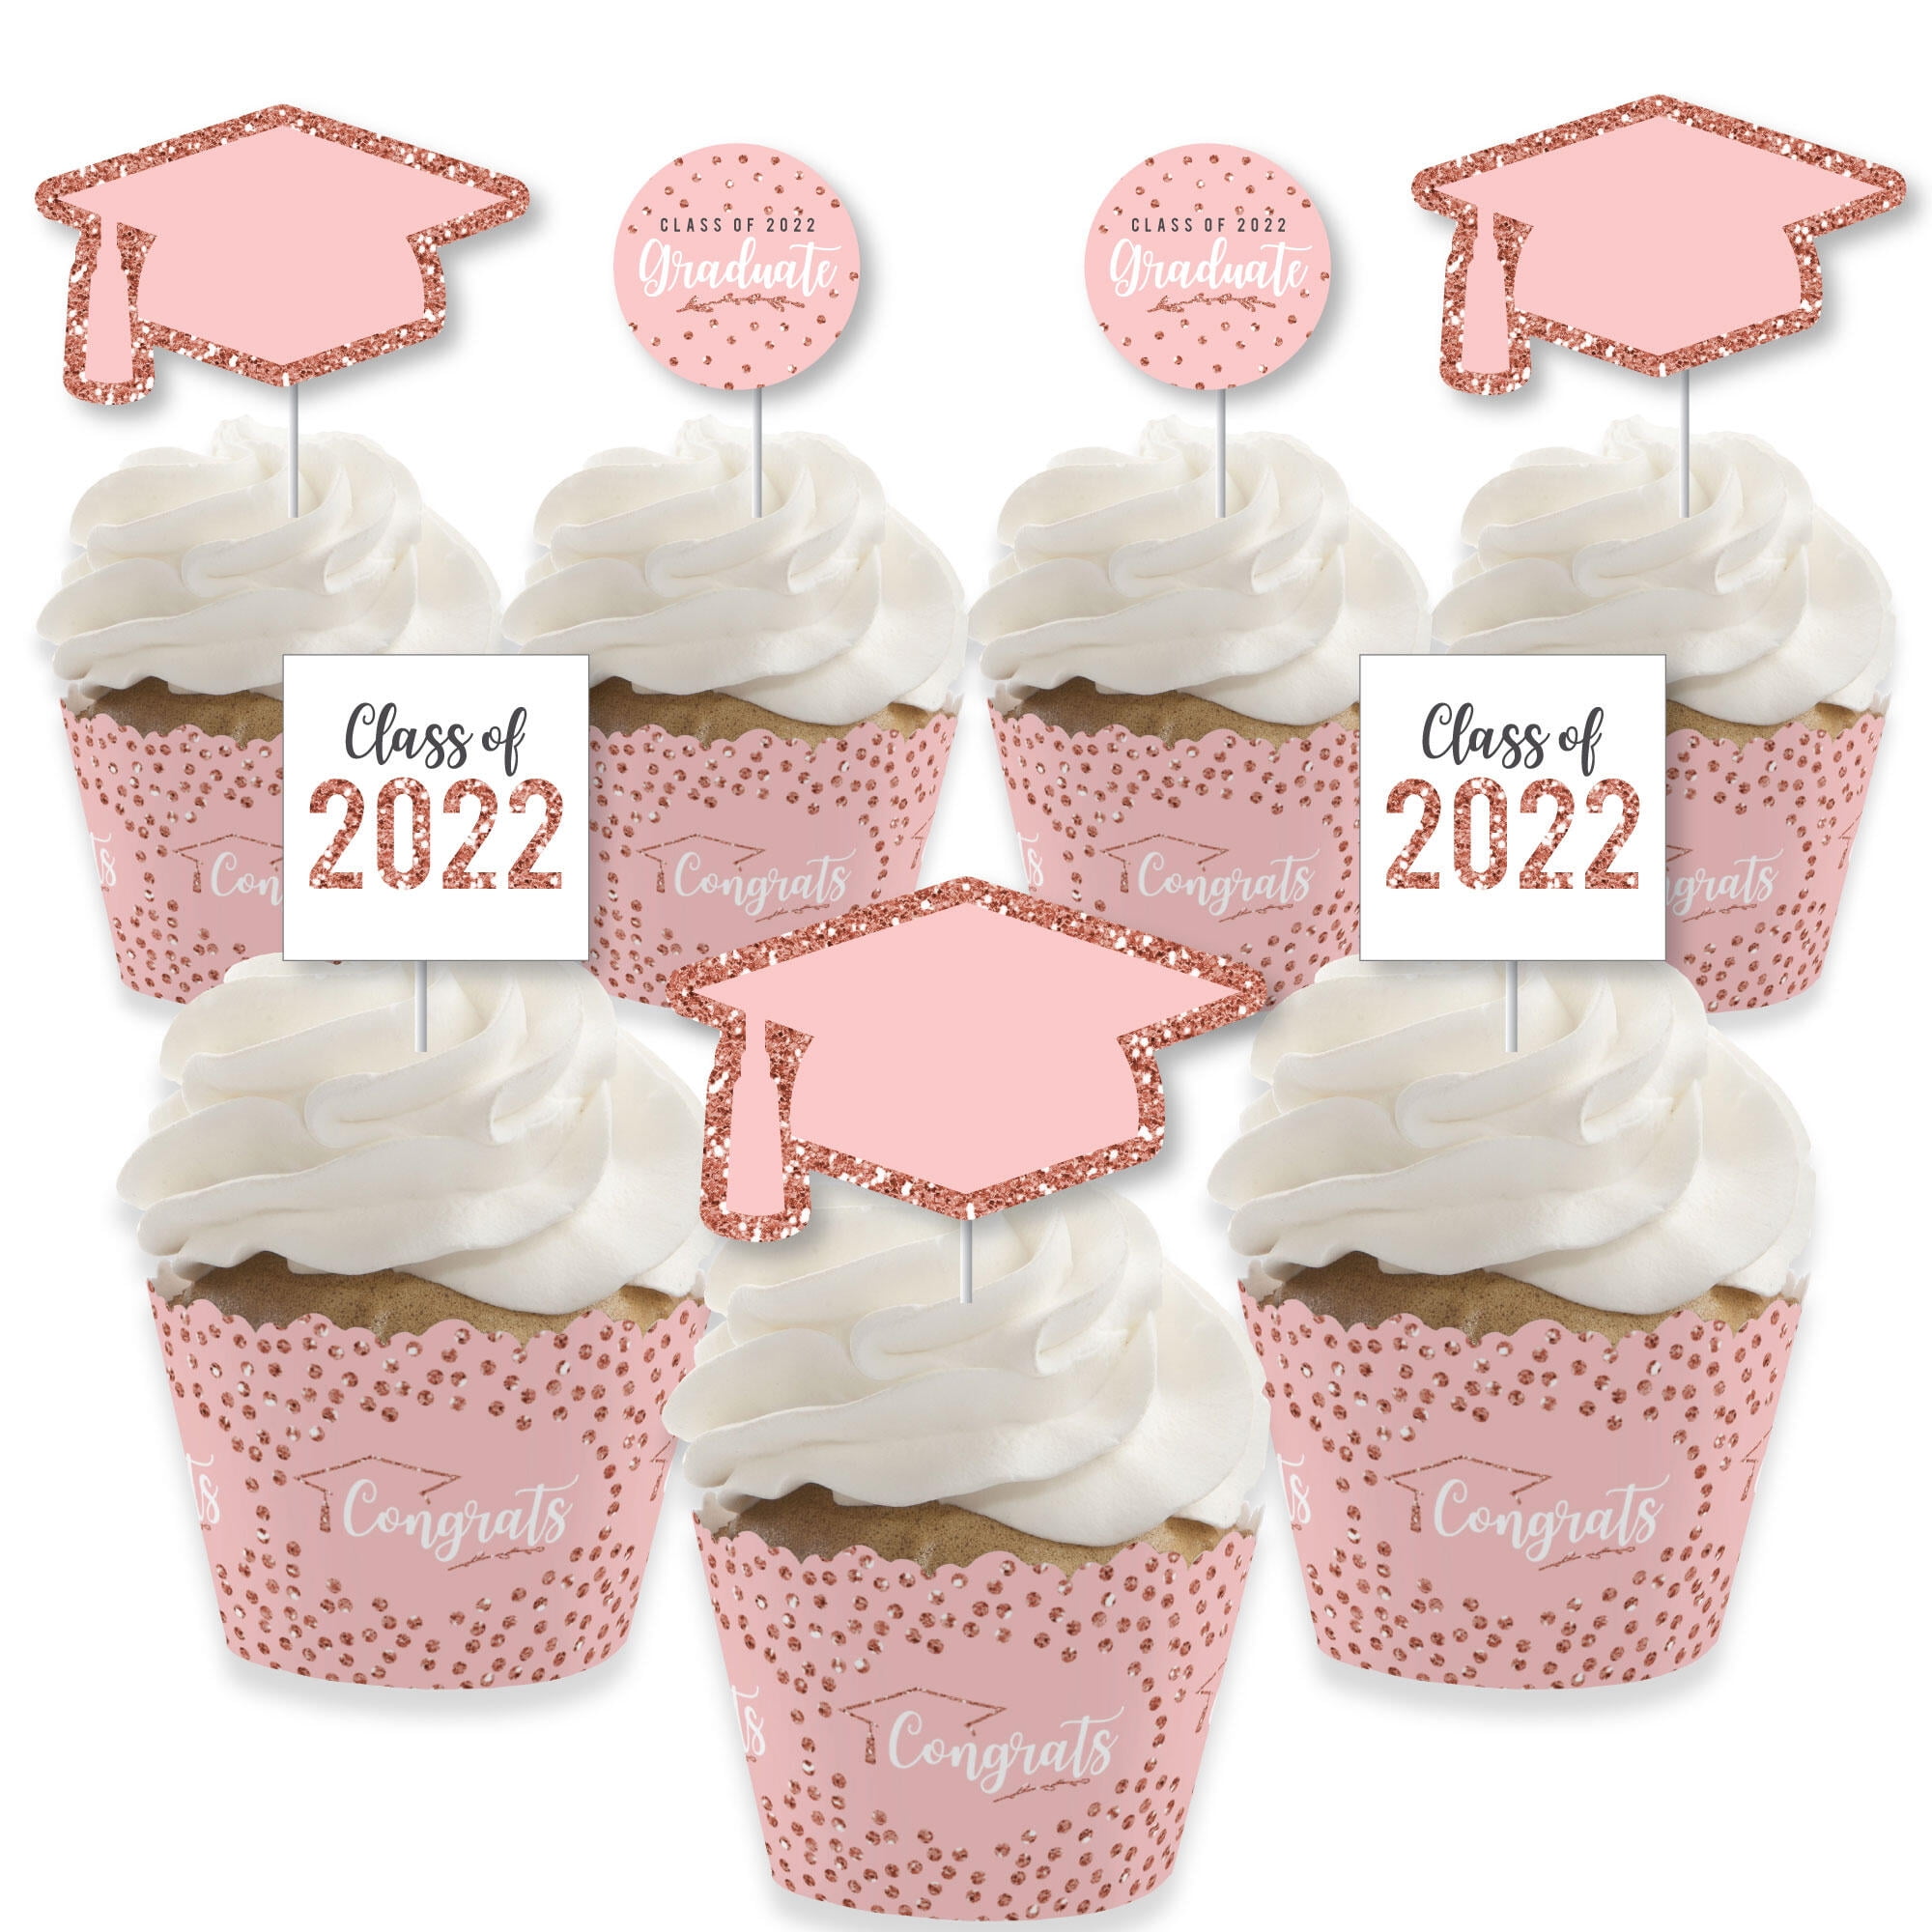 Set of 24 Cupcake Decoration Big Dot of Happiness Bright Future Graduation Party Cupcake Wrappers and Treat Picks Kit